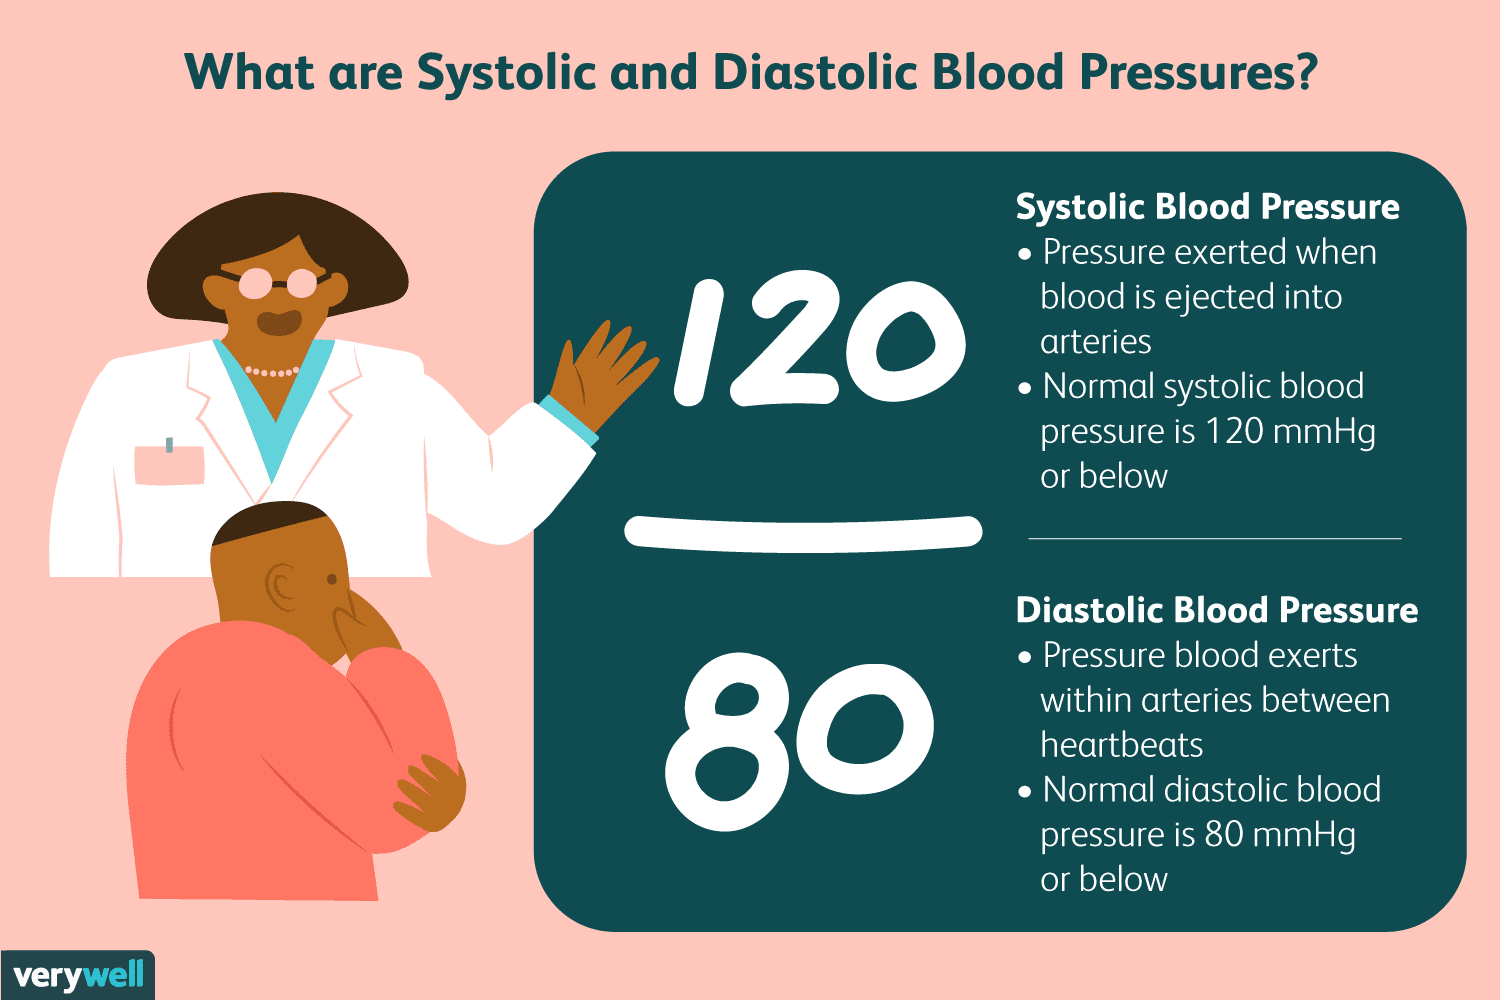 What Are Systolic and Diastolic Blood Pressures?